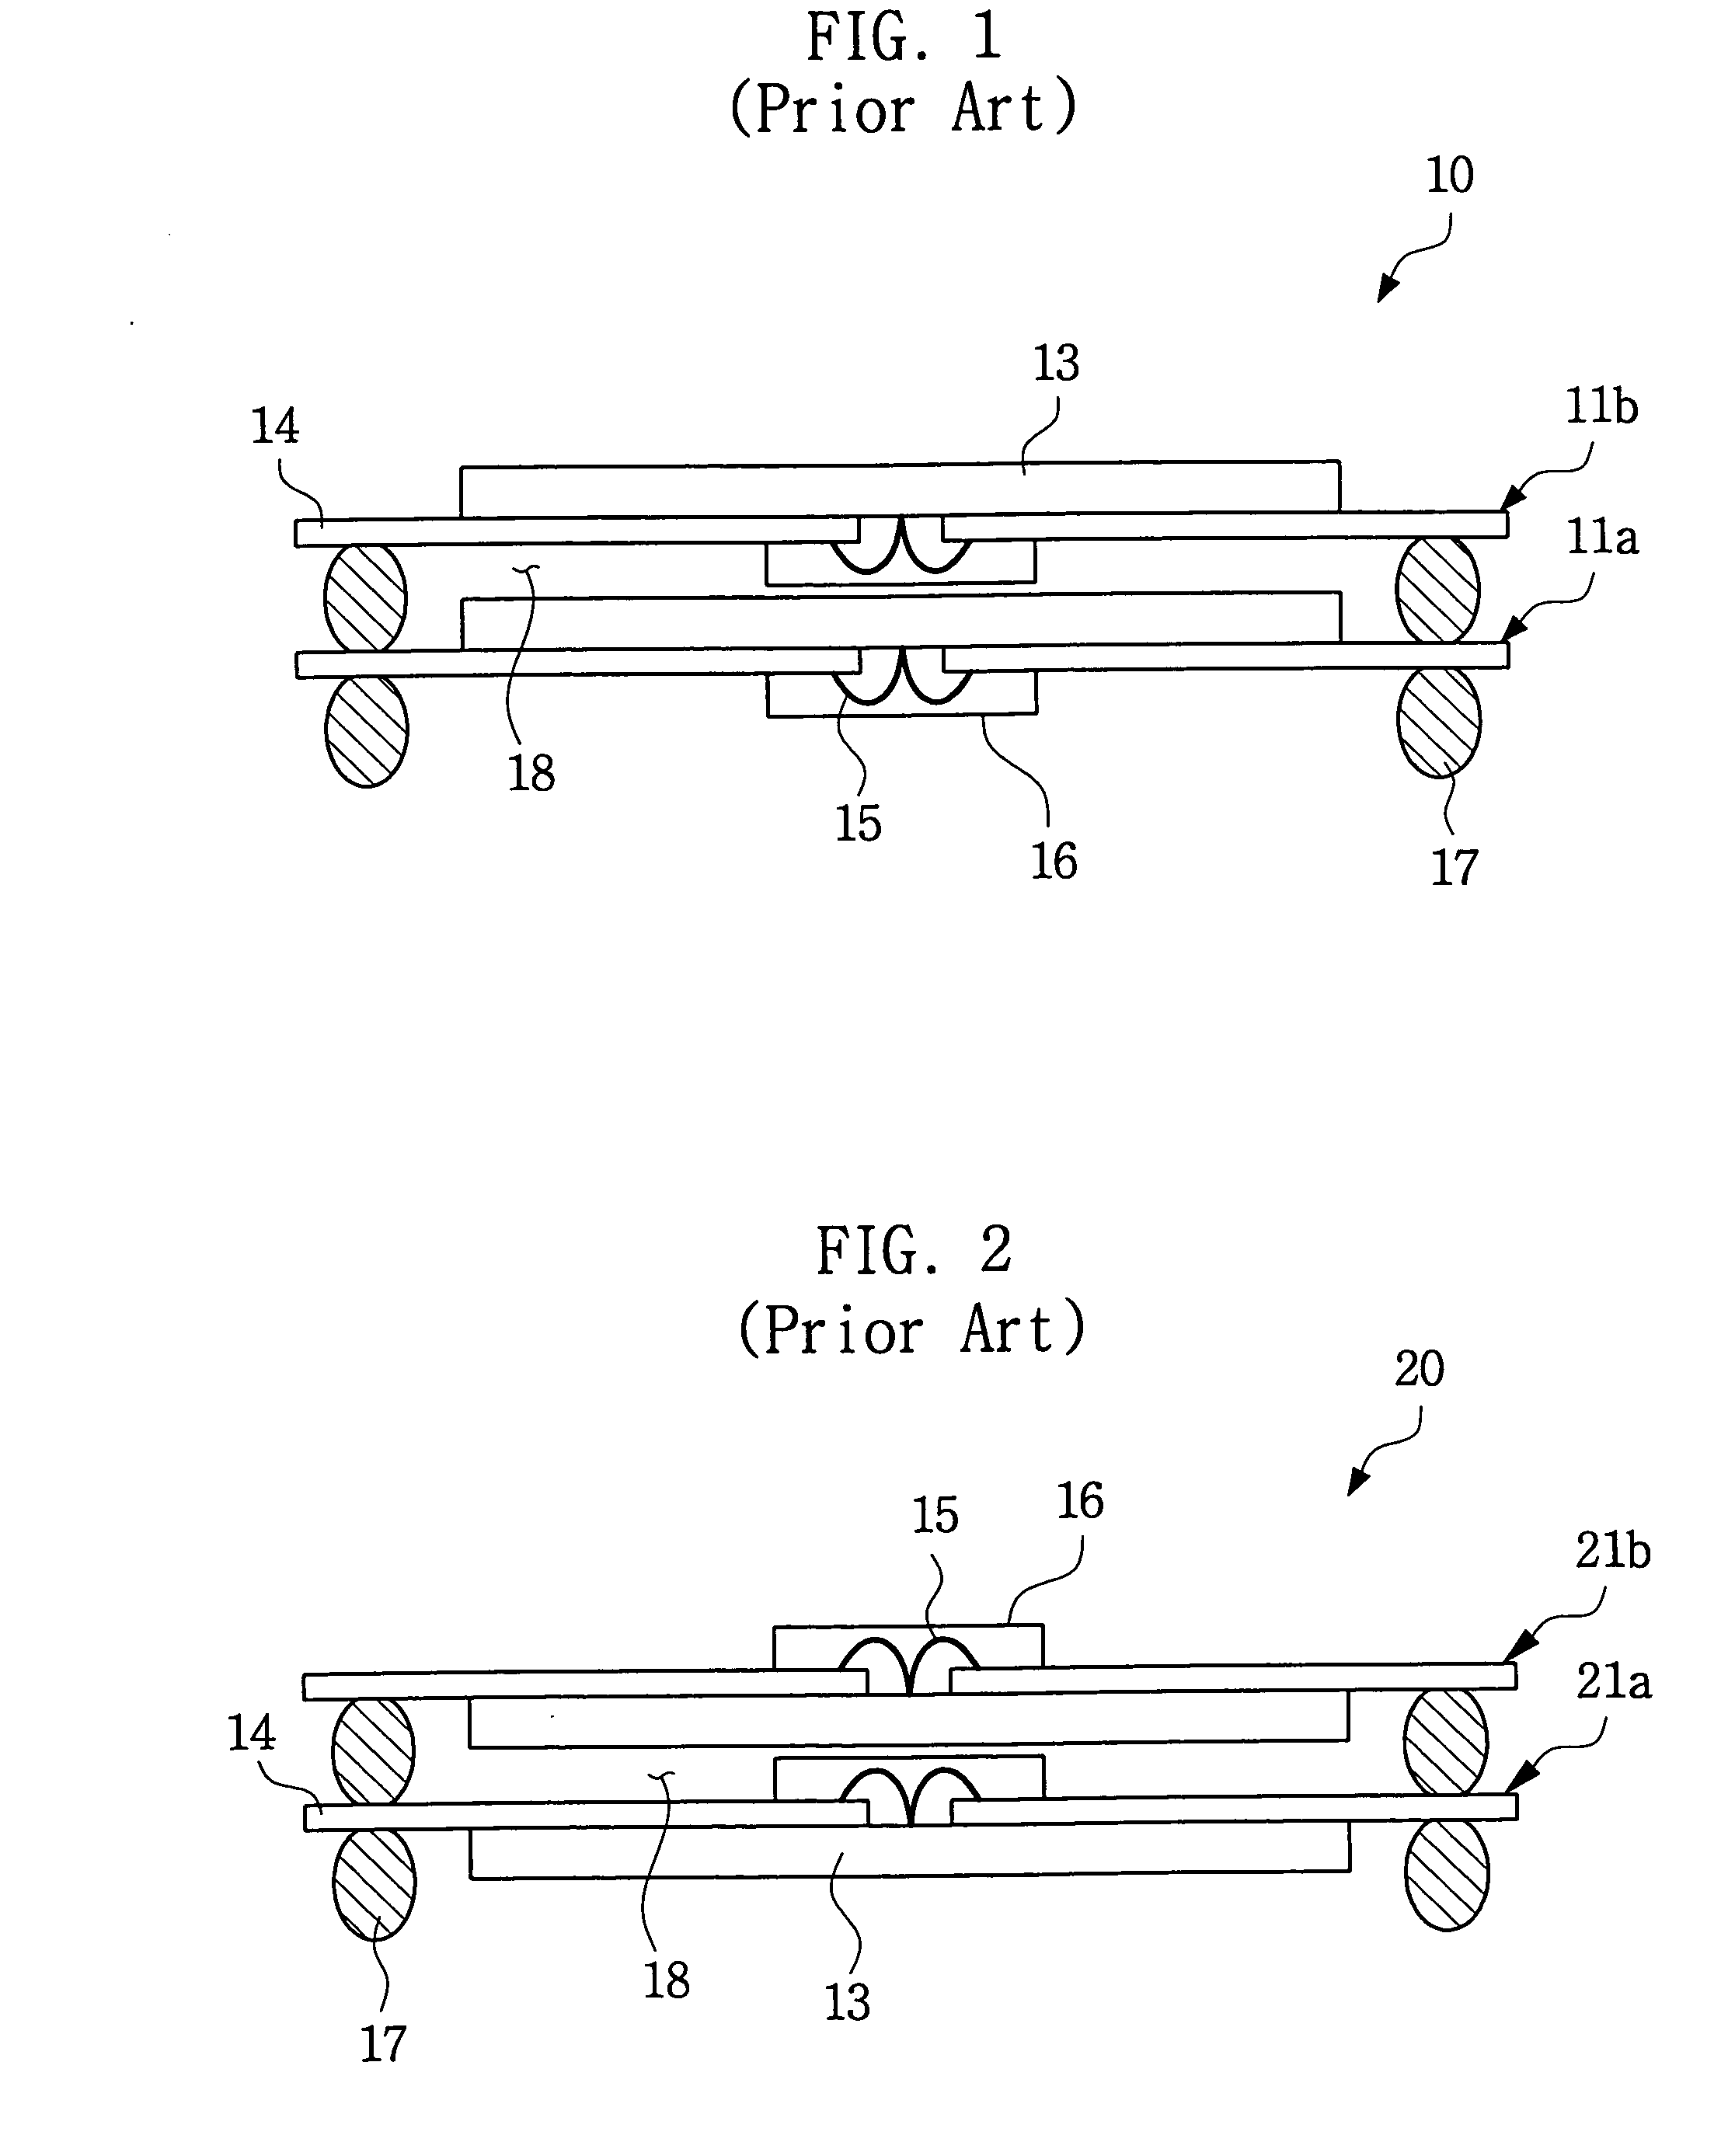 Semiconductor stack package and memory module with improved heat dissipation